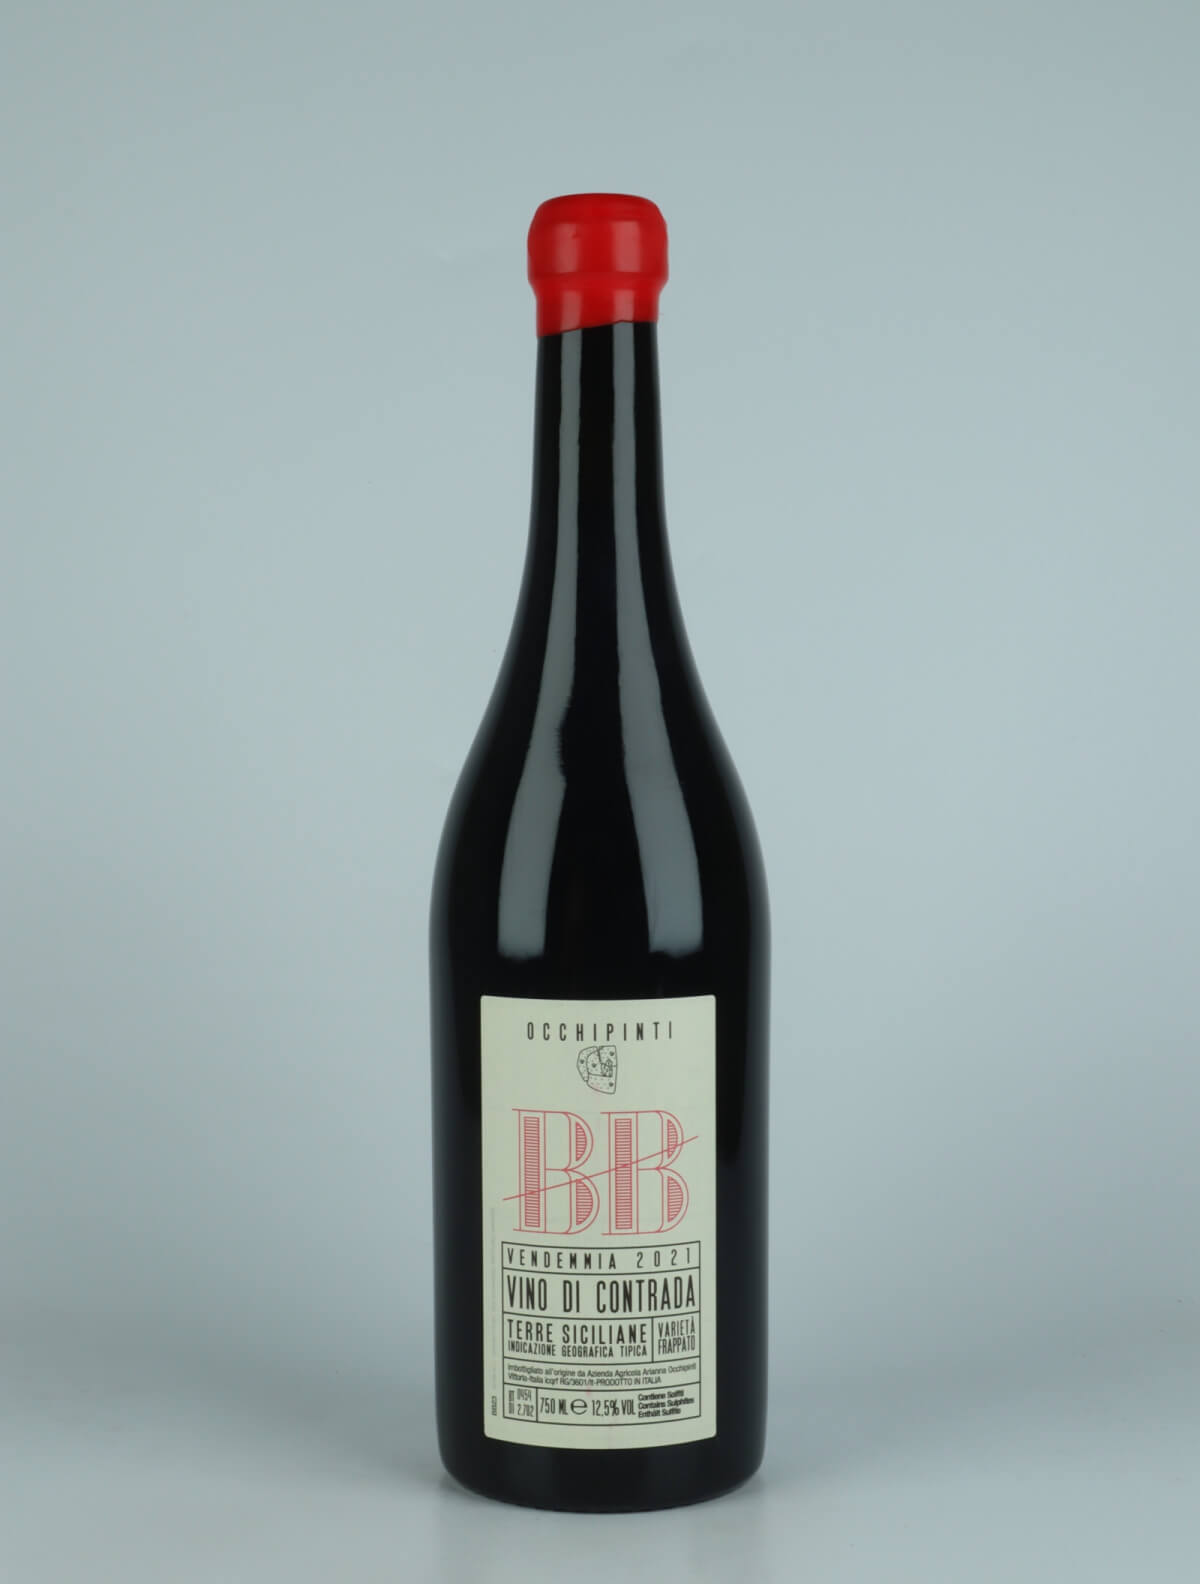 A bottle 2021 Bombolieri -BB Red wine from Arianna Occhipinti, Sicily in Italy